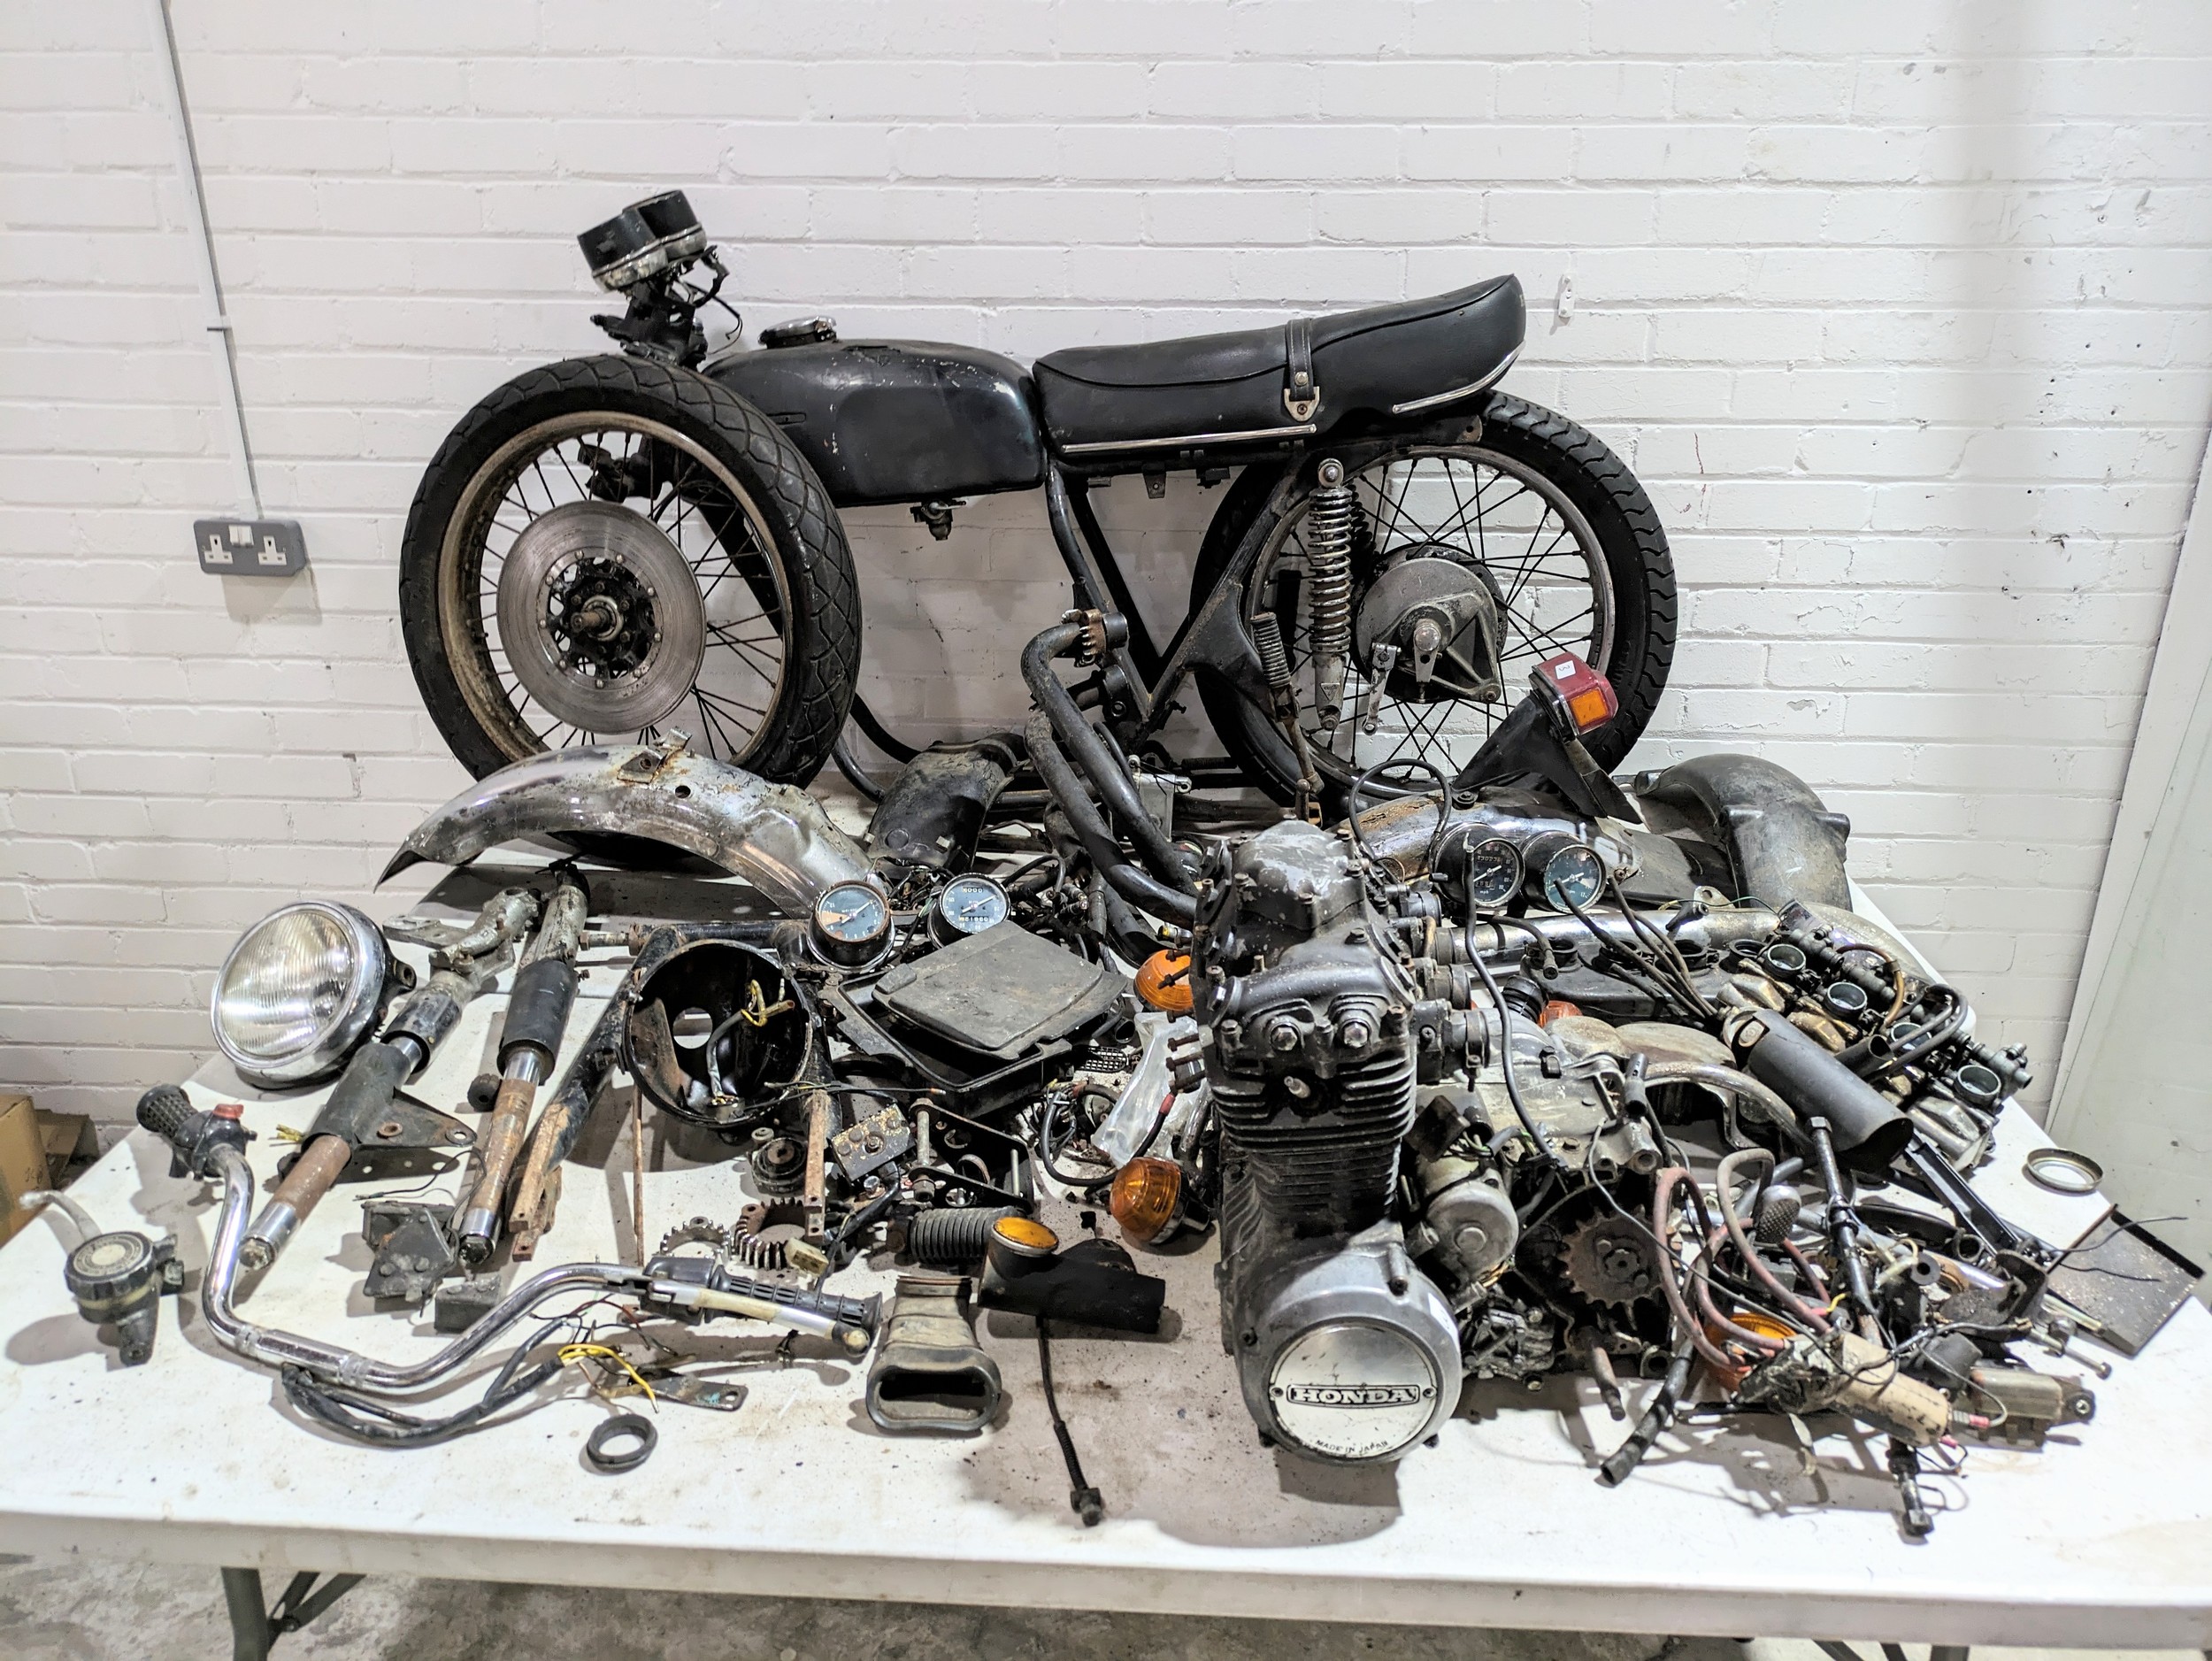 A 1979 Honda CB350-4 frame with parts and documents